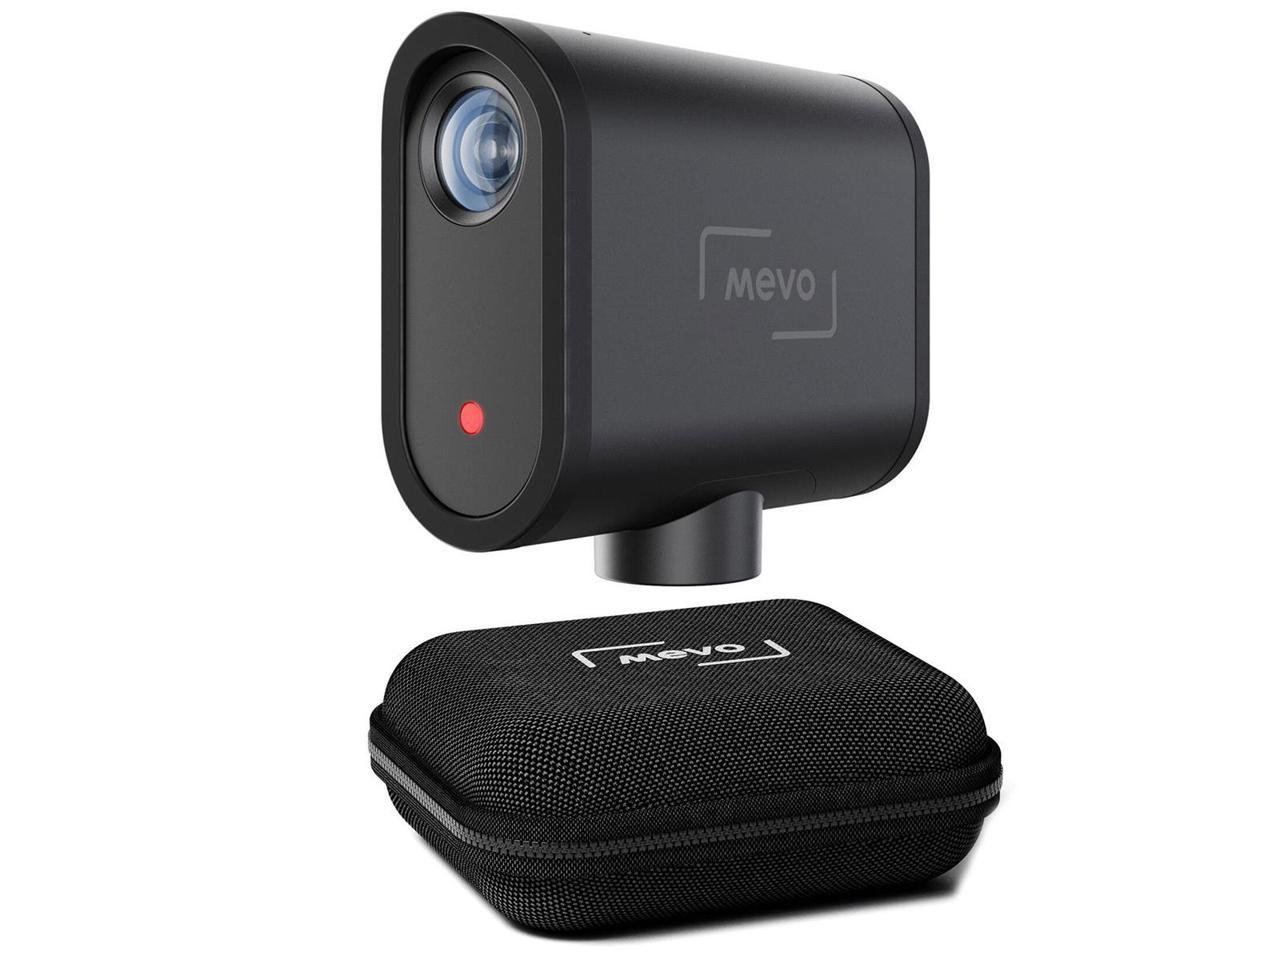 Stream in Full HD 1080p or Record in 4K Compatible with Android and iOS Mevo Plus The Live Event Camera 